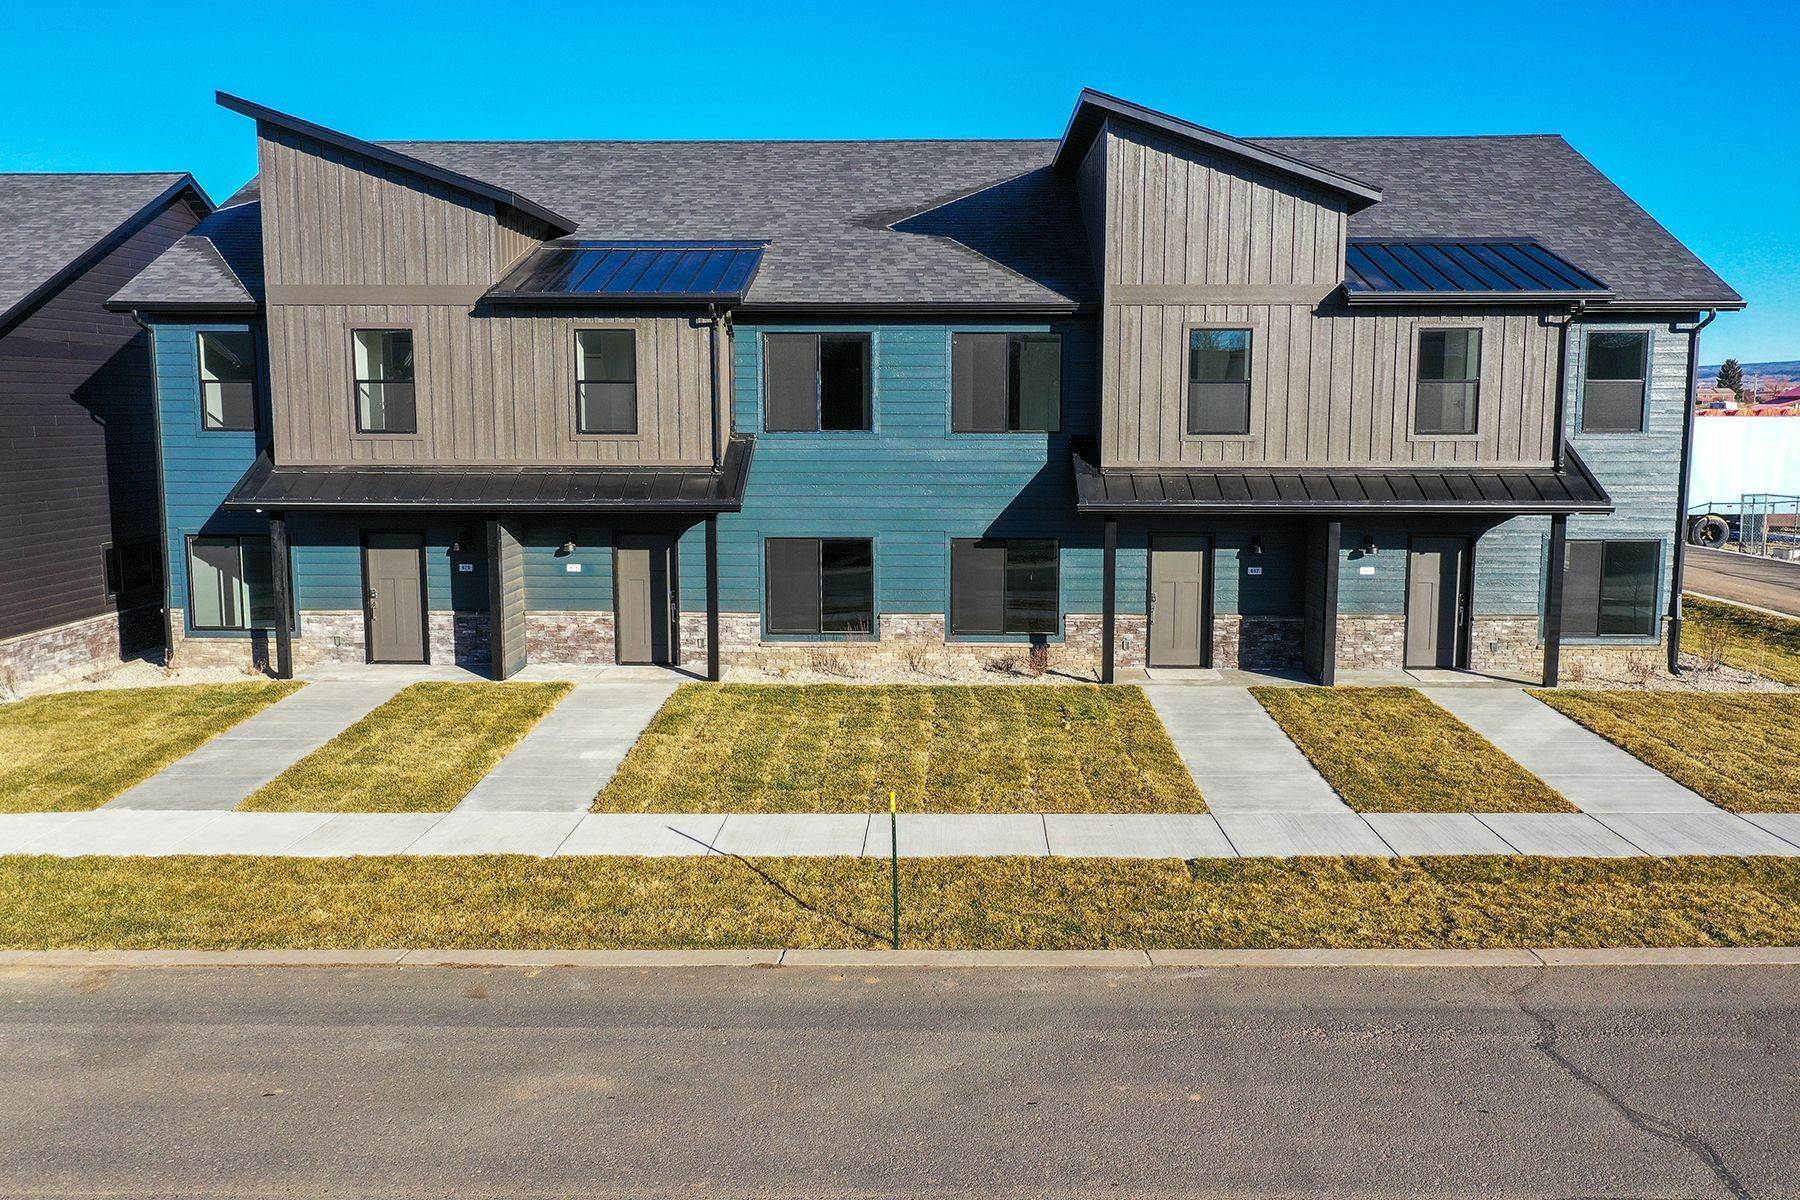 2. Townhouse for Sale at New Townhomes Starting at $539K 1597 Grinnell Way Driggs, Idaho 83422 United States